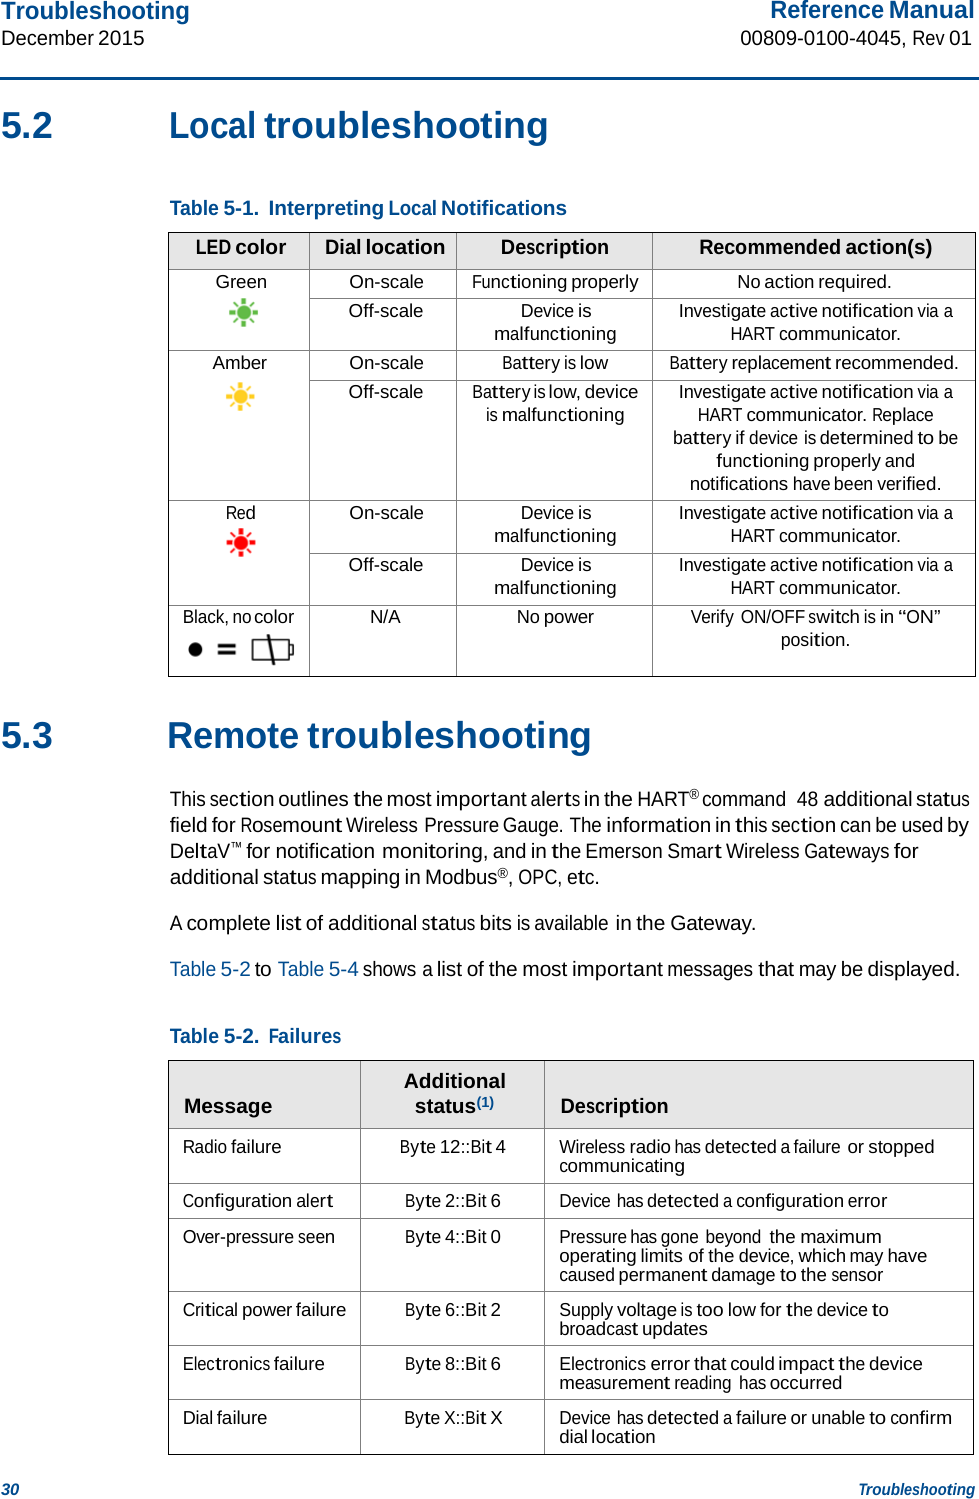 Troubleshooting December 2015 Reference Manual 00809-0100-4045, Rev 01 30 Troubleshooting    5.2  Local troubleshooting   Table 5-1. Interpreting Local Notifications  LED color Dial location Description Recommended action(s) Green On-scale Functioning properly No action required. Off-scale Device is malfunctioning Investigate active notification via a HART communicator. Amber On-scale Battery is low Battery replacement recommended. Off-scale Battery is low, device is malfunctioning Investigate active notification via a HART communicator. Replace battery if device is determined to be functioning properly and notifications have been verified. Red On-scale Device is malfunctioning Investigate active notification via a HART communicator. Off-scale Device is malfunctioning Investigate active notification via a HART communicator. Black, no color N/A No power Verify ON/OFF switch is in “ON” position.   5.3  Remote troubleshooting  This section outlines the most important alerts in the HART® command  48 additional status field for Rosemount Wireless Pressure Gauge. The information in this section can be used by DeltaV™ for notification monitoring, and in the Emerson Smart Wireless Gateways for additional status mapping in Modbus®, OPC, etc.  A complete list of additional status bits is available in the Gateway.  Table 5-2 to Table 5-4 shows a list of the most important messages that may be displayed.   Table 5-2. Failures    Message Additional status(1)   Description Radio failure Byte 12::Bit 4 Wireless radio has detected a failure or stopped communicating Configuration alert Byte 2::Bit 6 Device has detected a configuration error Over-pressure seen Byte 4::Bit 0 Pressure has gone beyond the maximum operating limits of the device, which may have caused permanent damage to the sensor Critical power failure Byte 6::Bit 2 Supply voltage is too low for the device to broadcast updates Electronics failure Byte 8::Bit 6 Electronics error that could impact the device measurement reading has occurred Dial failure Byte X::Bit X Device has detected a failure or unable to confirm dial location 